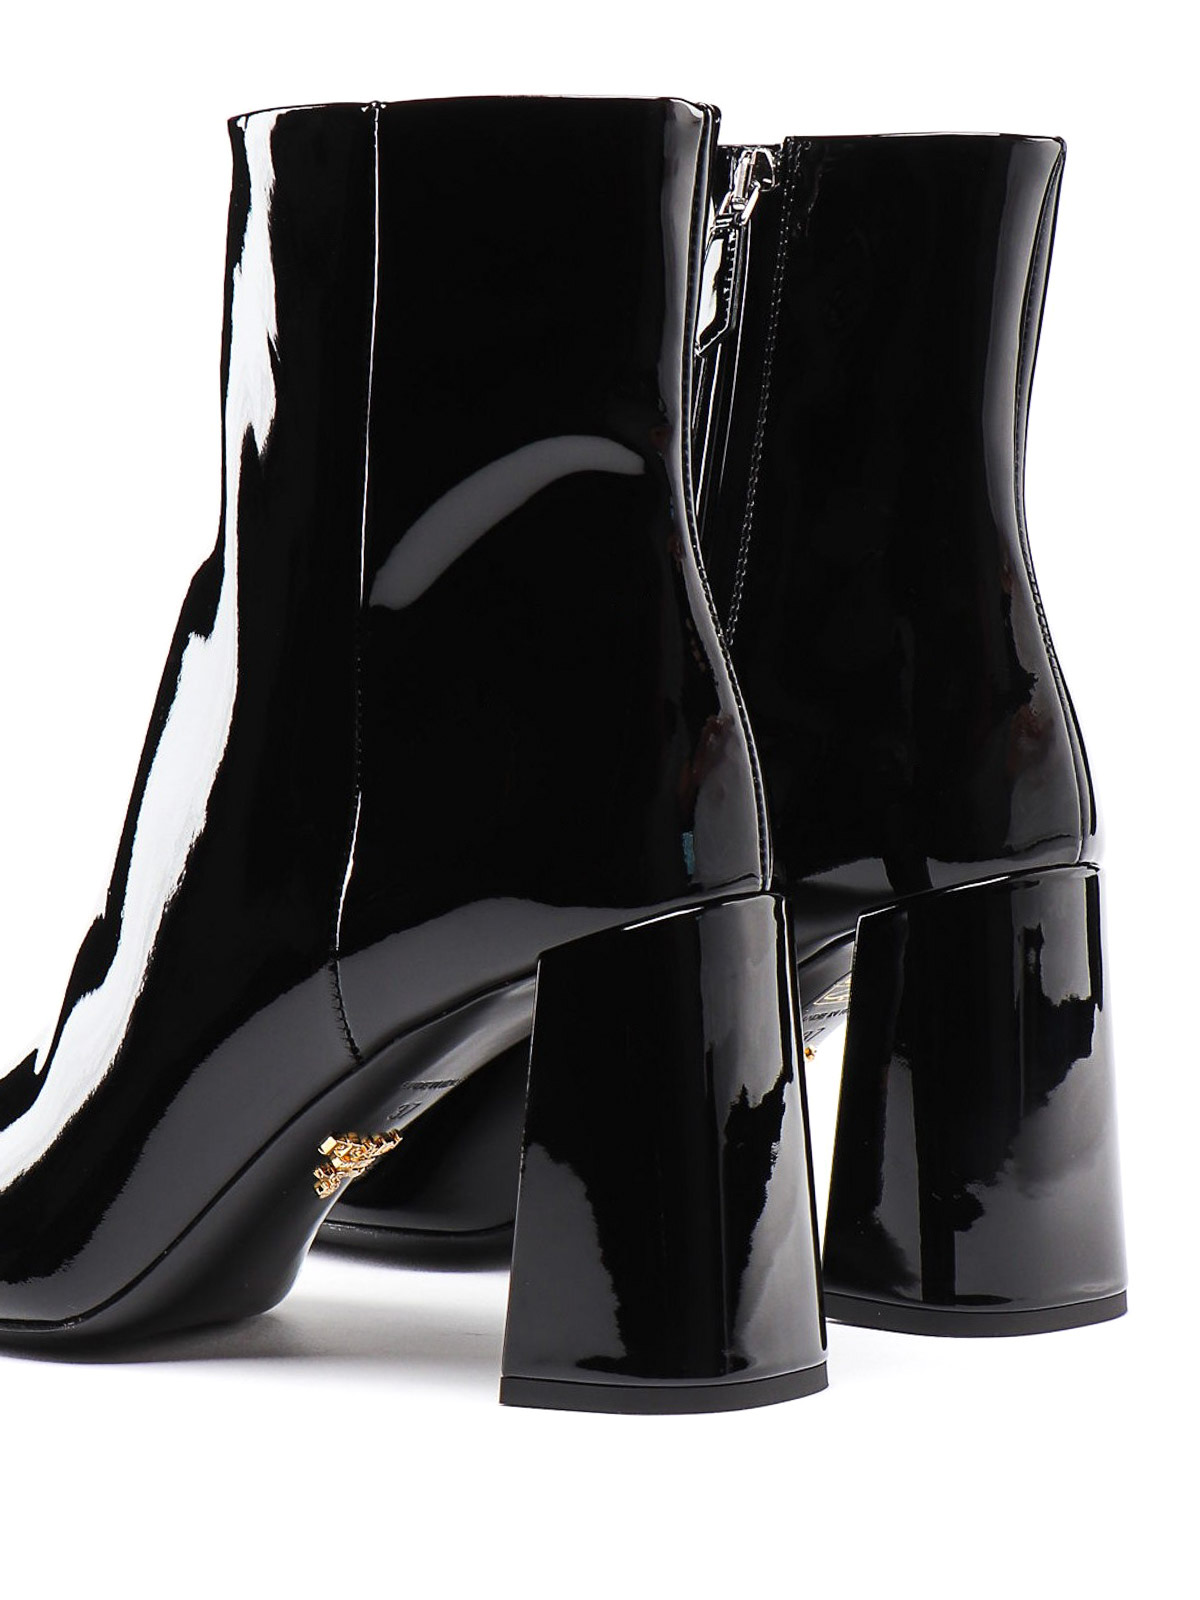 square toe patent leather boots